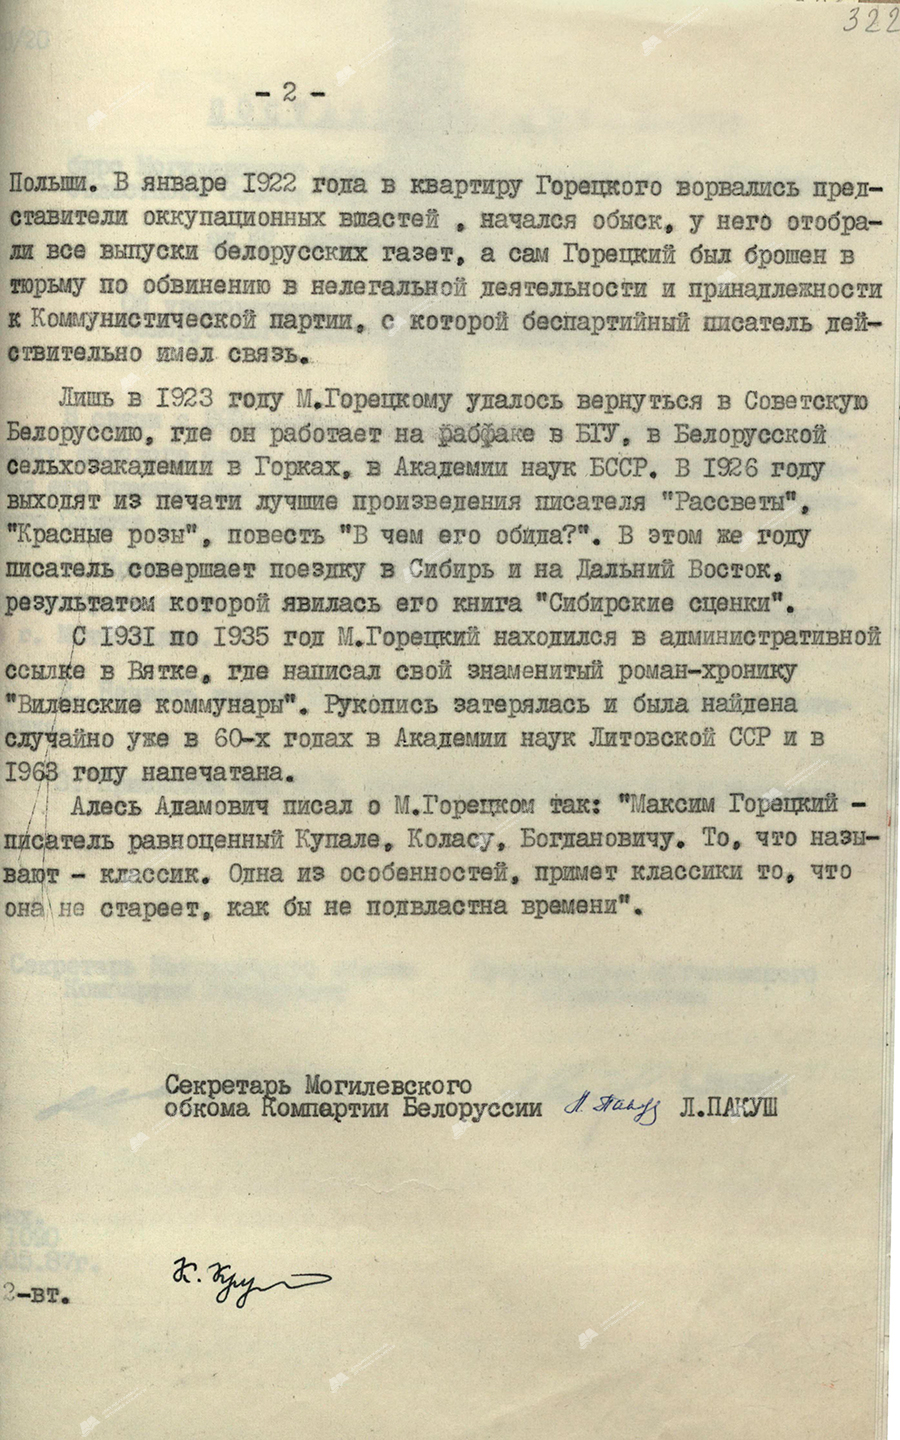 Resolution No. 6-47-20/19 of the Bureau of the Mogilev Regional Committee of the Communist Party of Belarus and the Executive Committee of the Mogilev Regional Council of People’s Deputies «On the establishment of a memorial plaque in honor of the Belarusian writer M.I.Goretsky»-с. 2